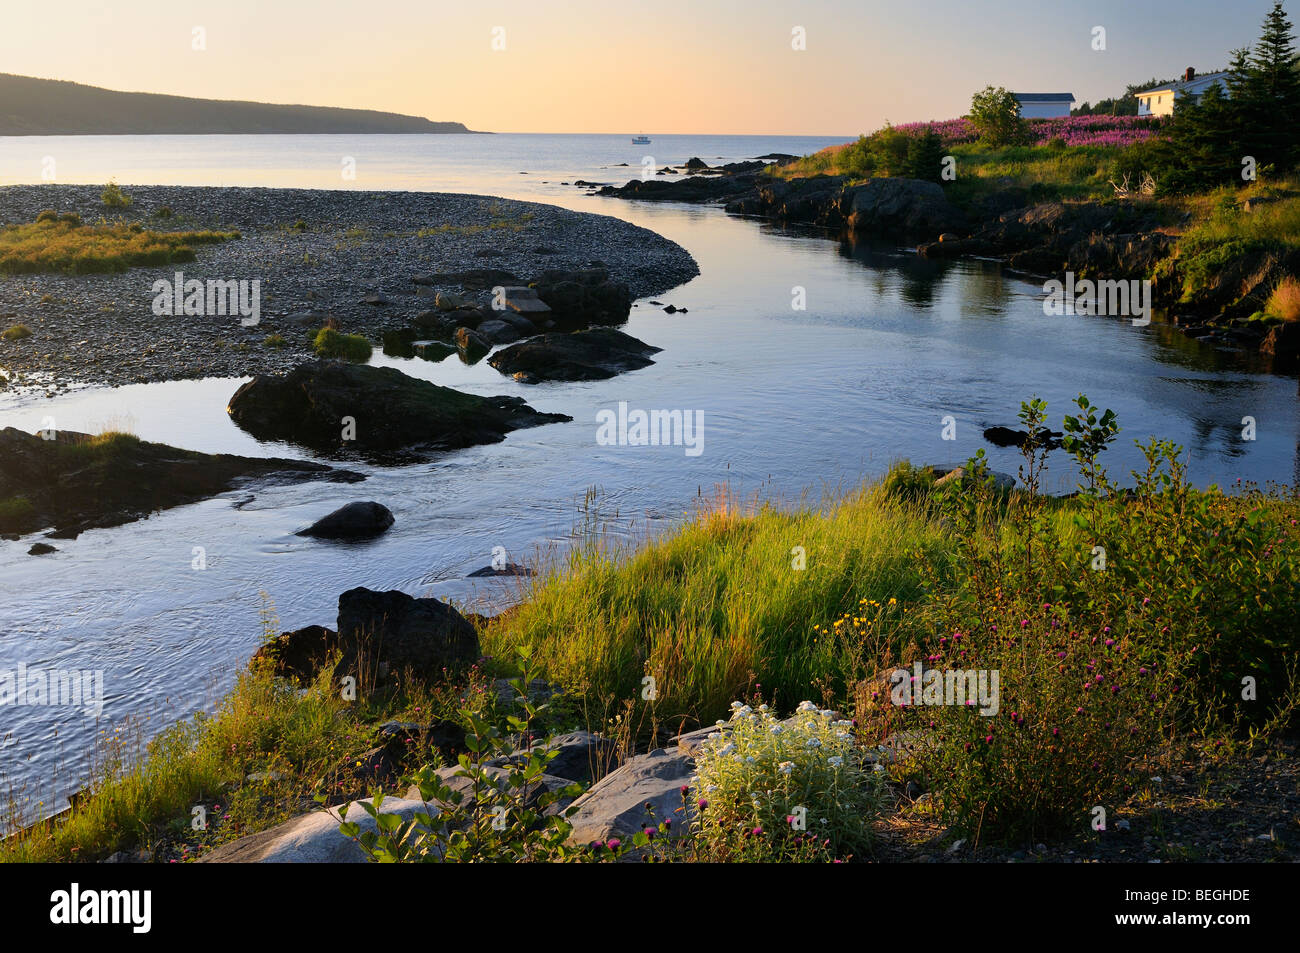 Wildflowers along Mobile River at sunset over Atlantic ocean with a boat in the Bay on Avalon Peninsula Newfoundland Stock Photo